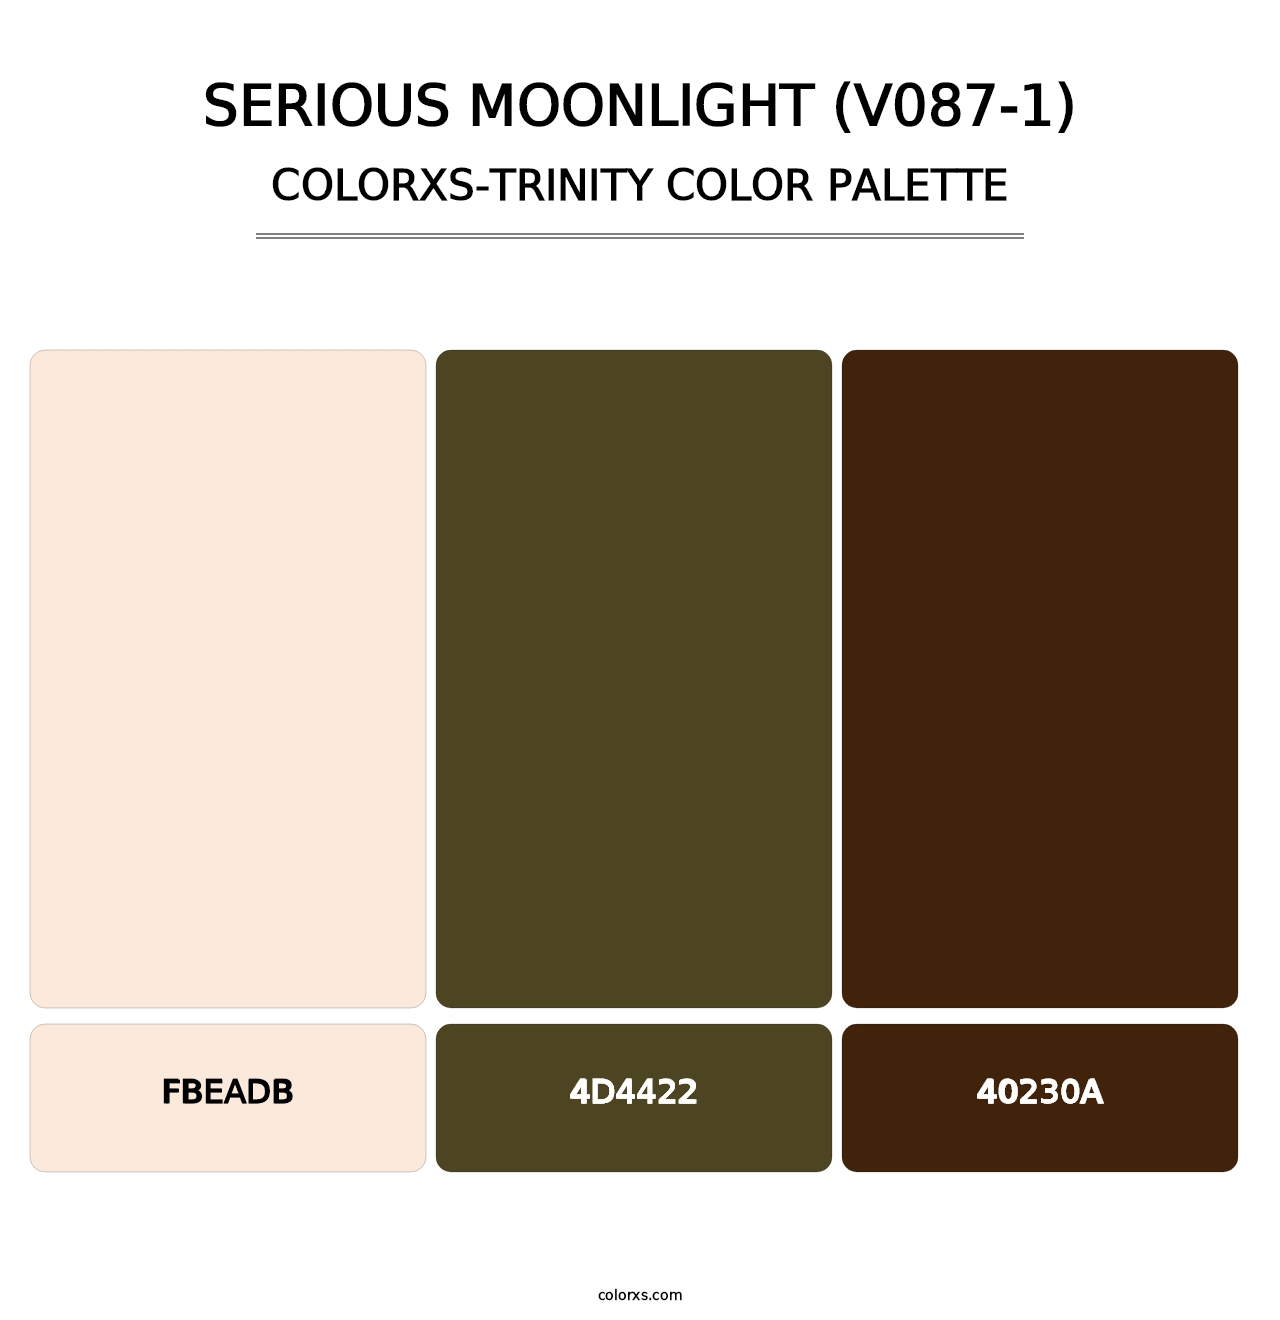 Serious Moonlight (V087-1) - Colorxs Trinity Palette